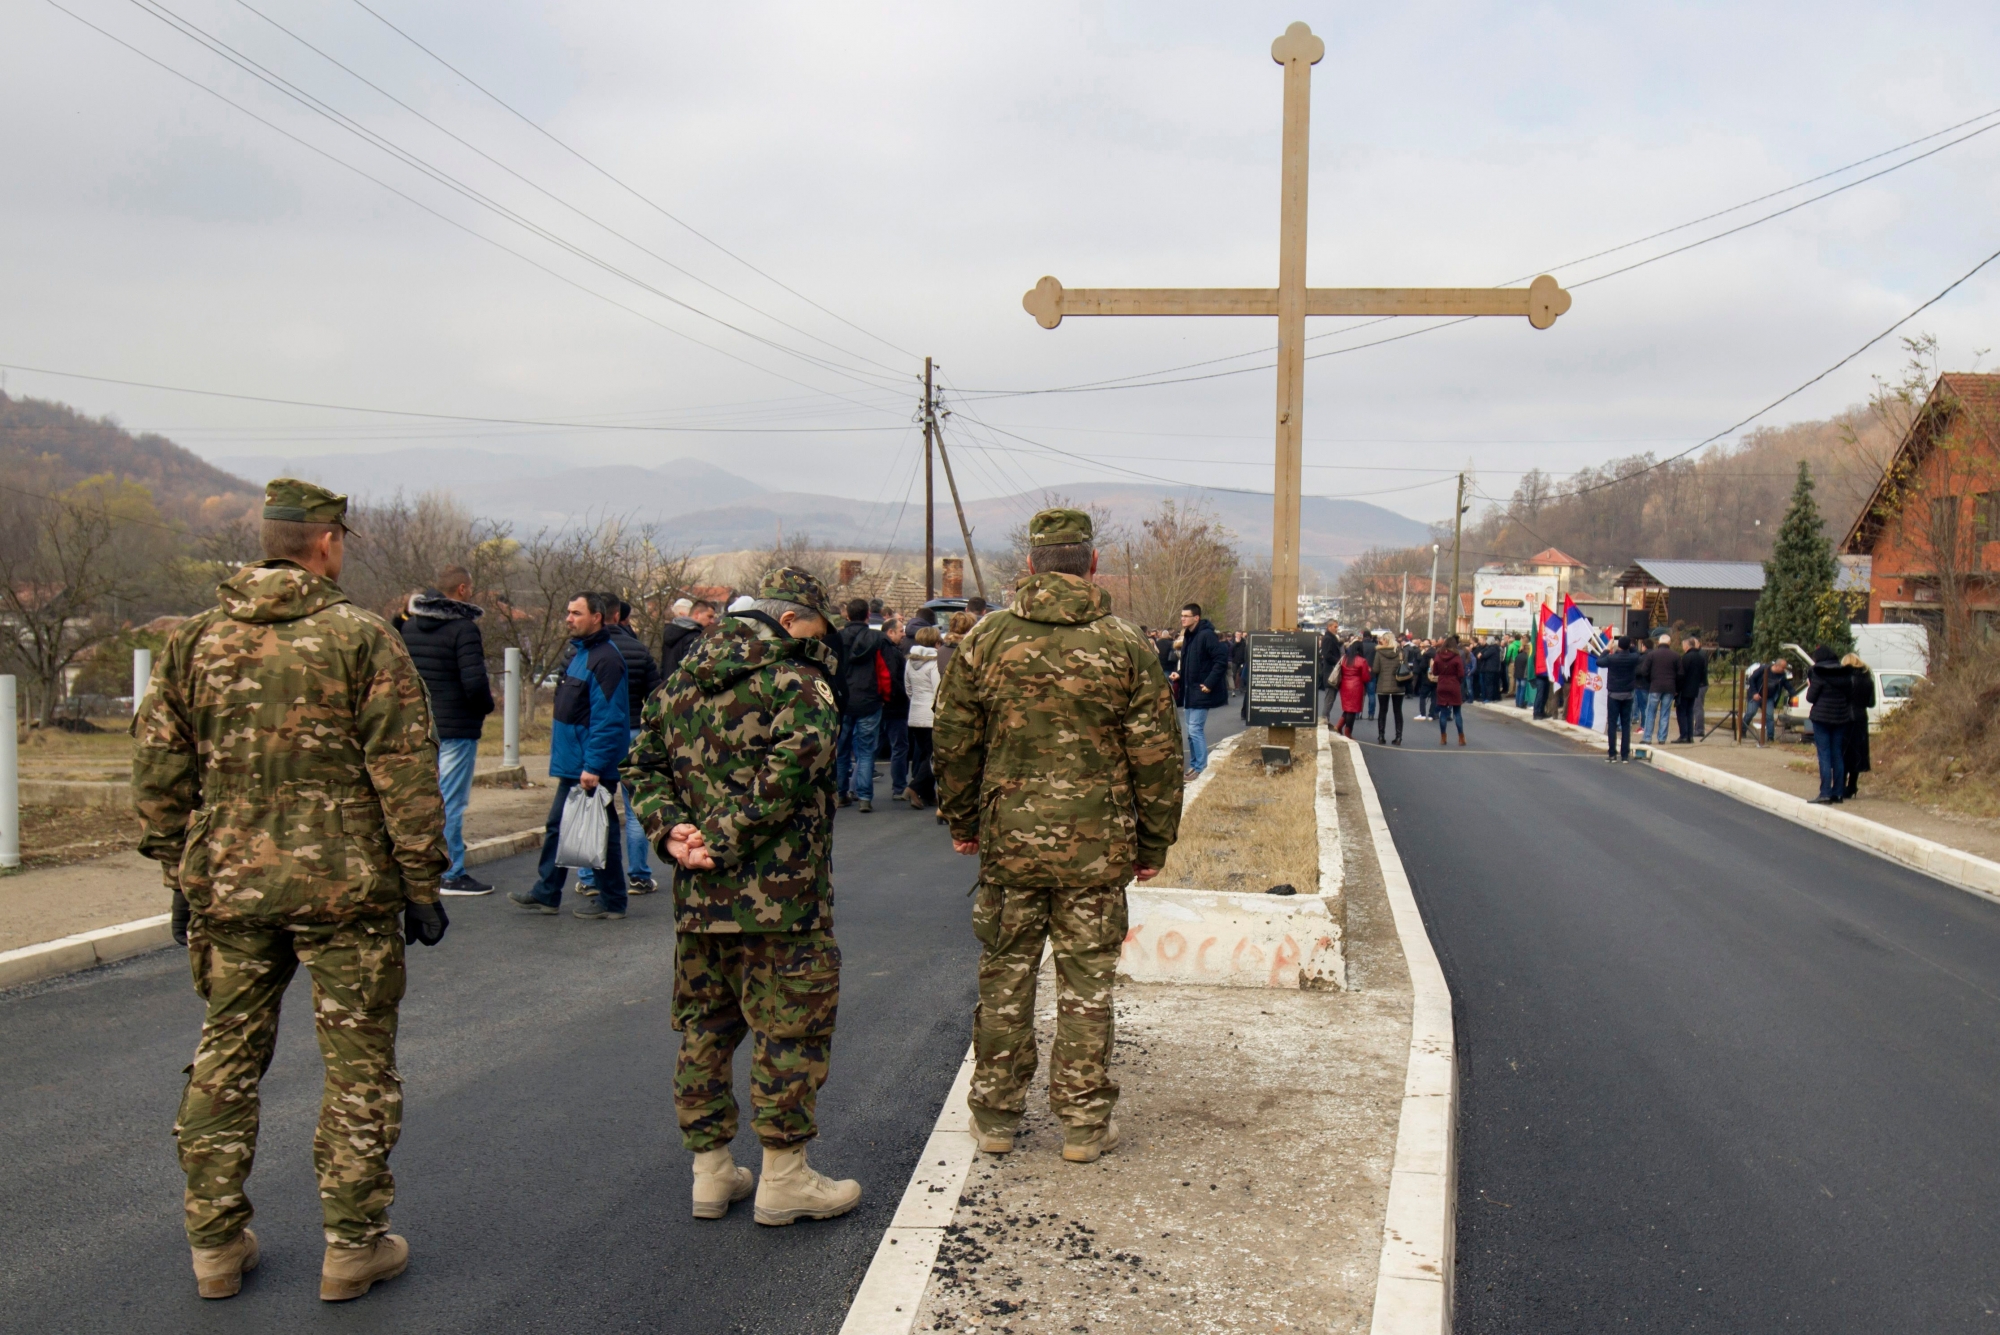 Slovenian troops serving in the NATO-led peacekeeping mission in Kosovo, observe Kosovo Serbs as they block a road in the village Rudare, north of Serb-dominated part of ethnically divided town of Mitrovica, Kosovo, Friday, Nov.23, 2018. Kosovo police arrested three ethnic Serbs, including two police officers, early Friday on suspicion of involvement in the killing of a leading Serb politician in the north of the country. (AP Photo/Bojan Slavkovic) Kosovo Serbs